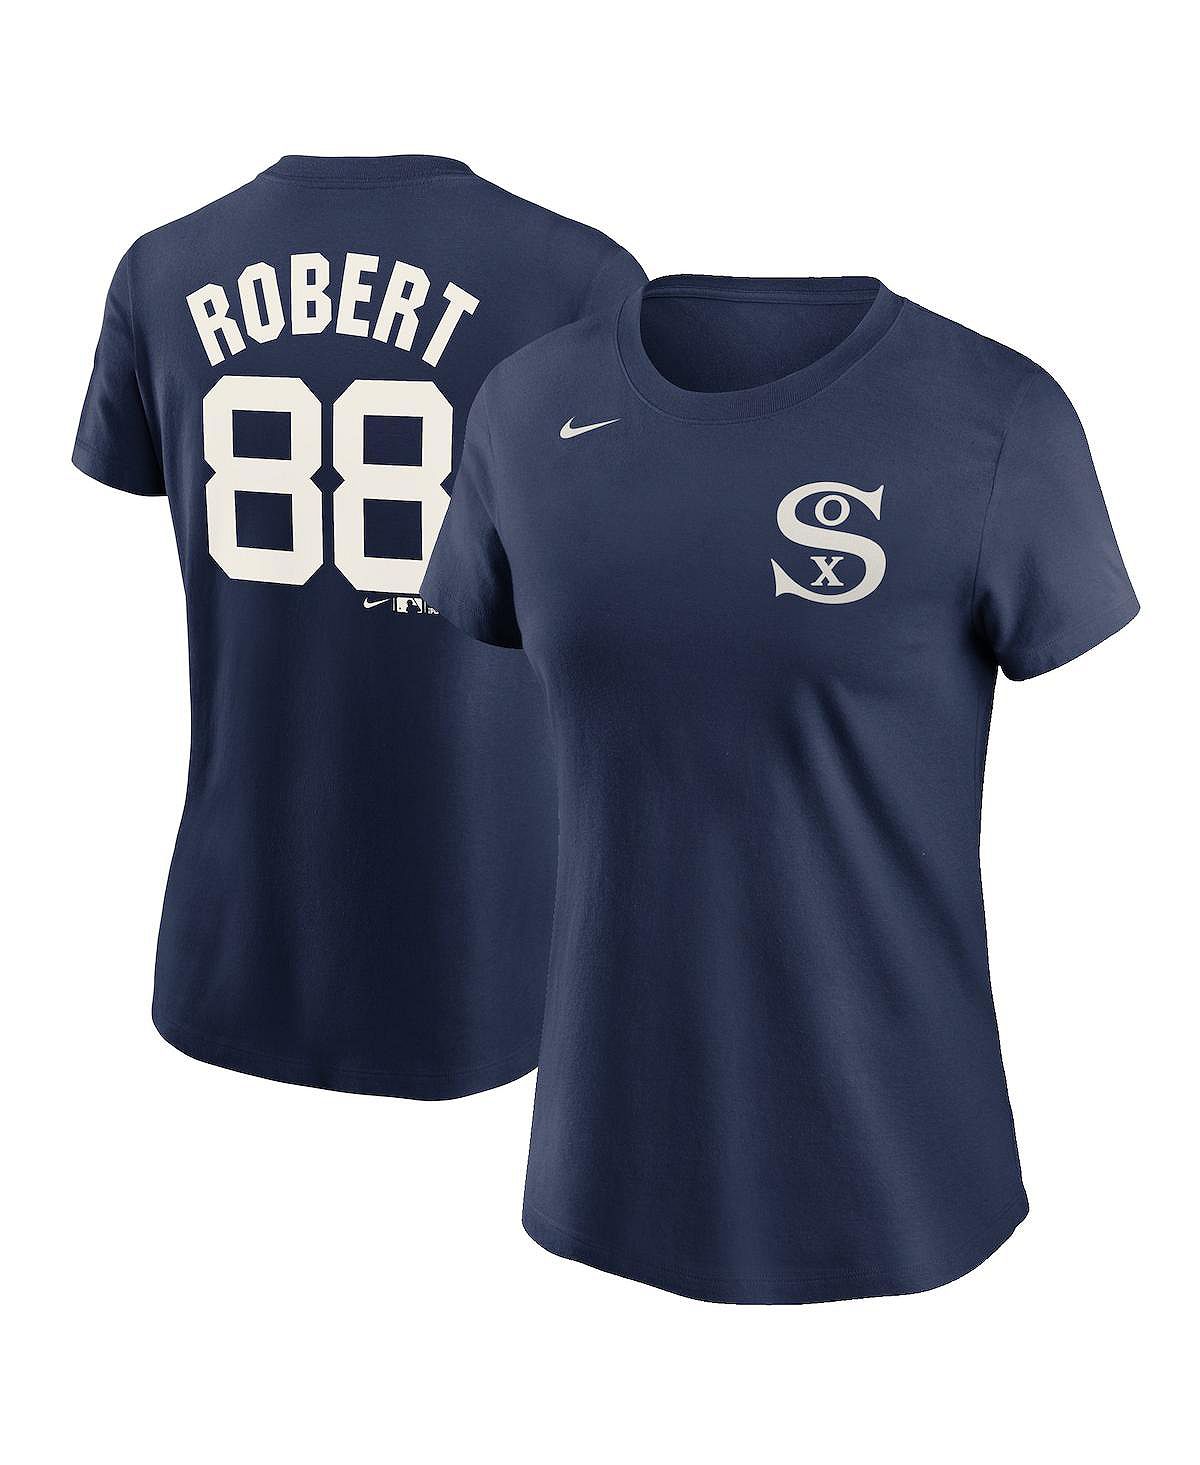 Женская футболка luis robert navy chicago white sox 2021 field of dreams name and number Nike, синий